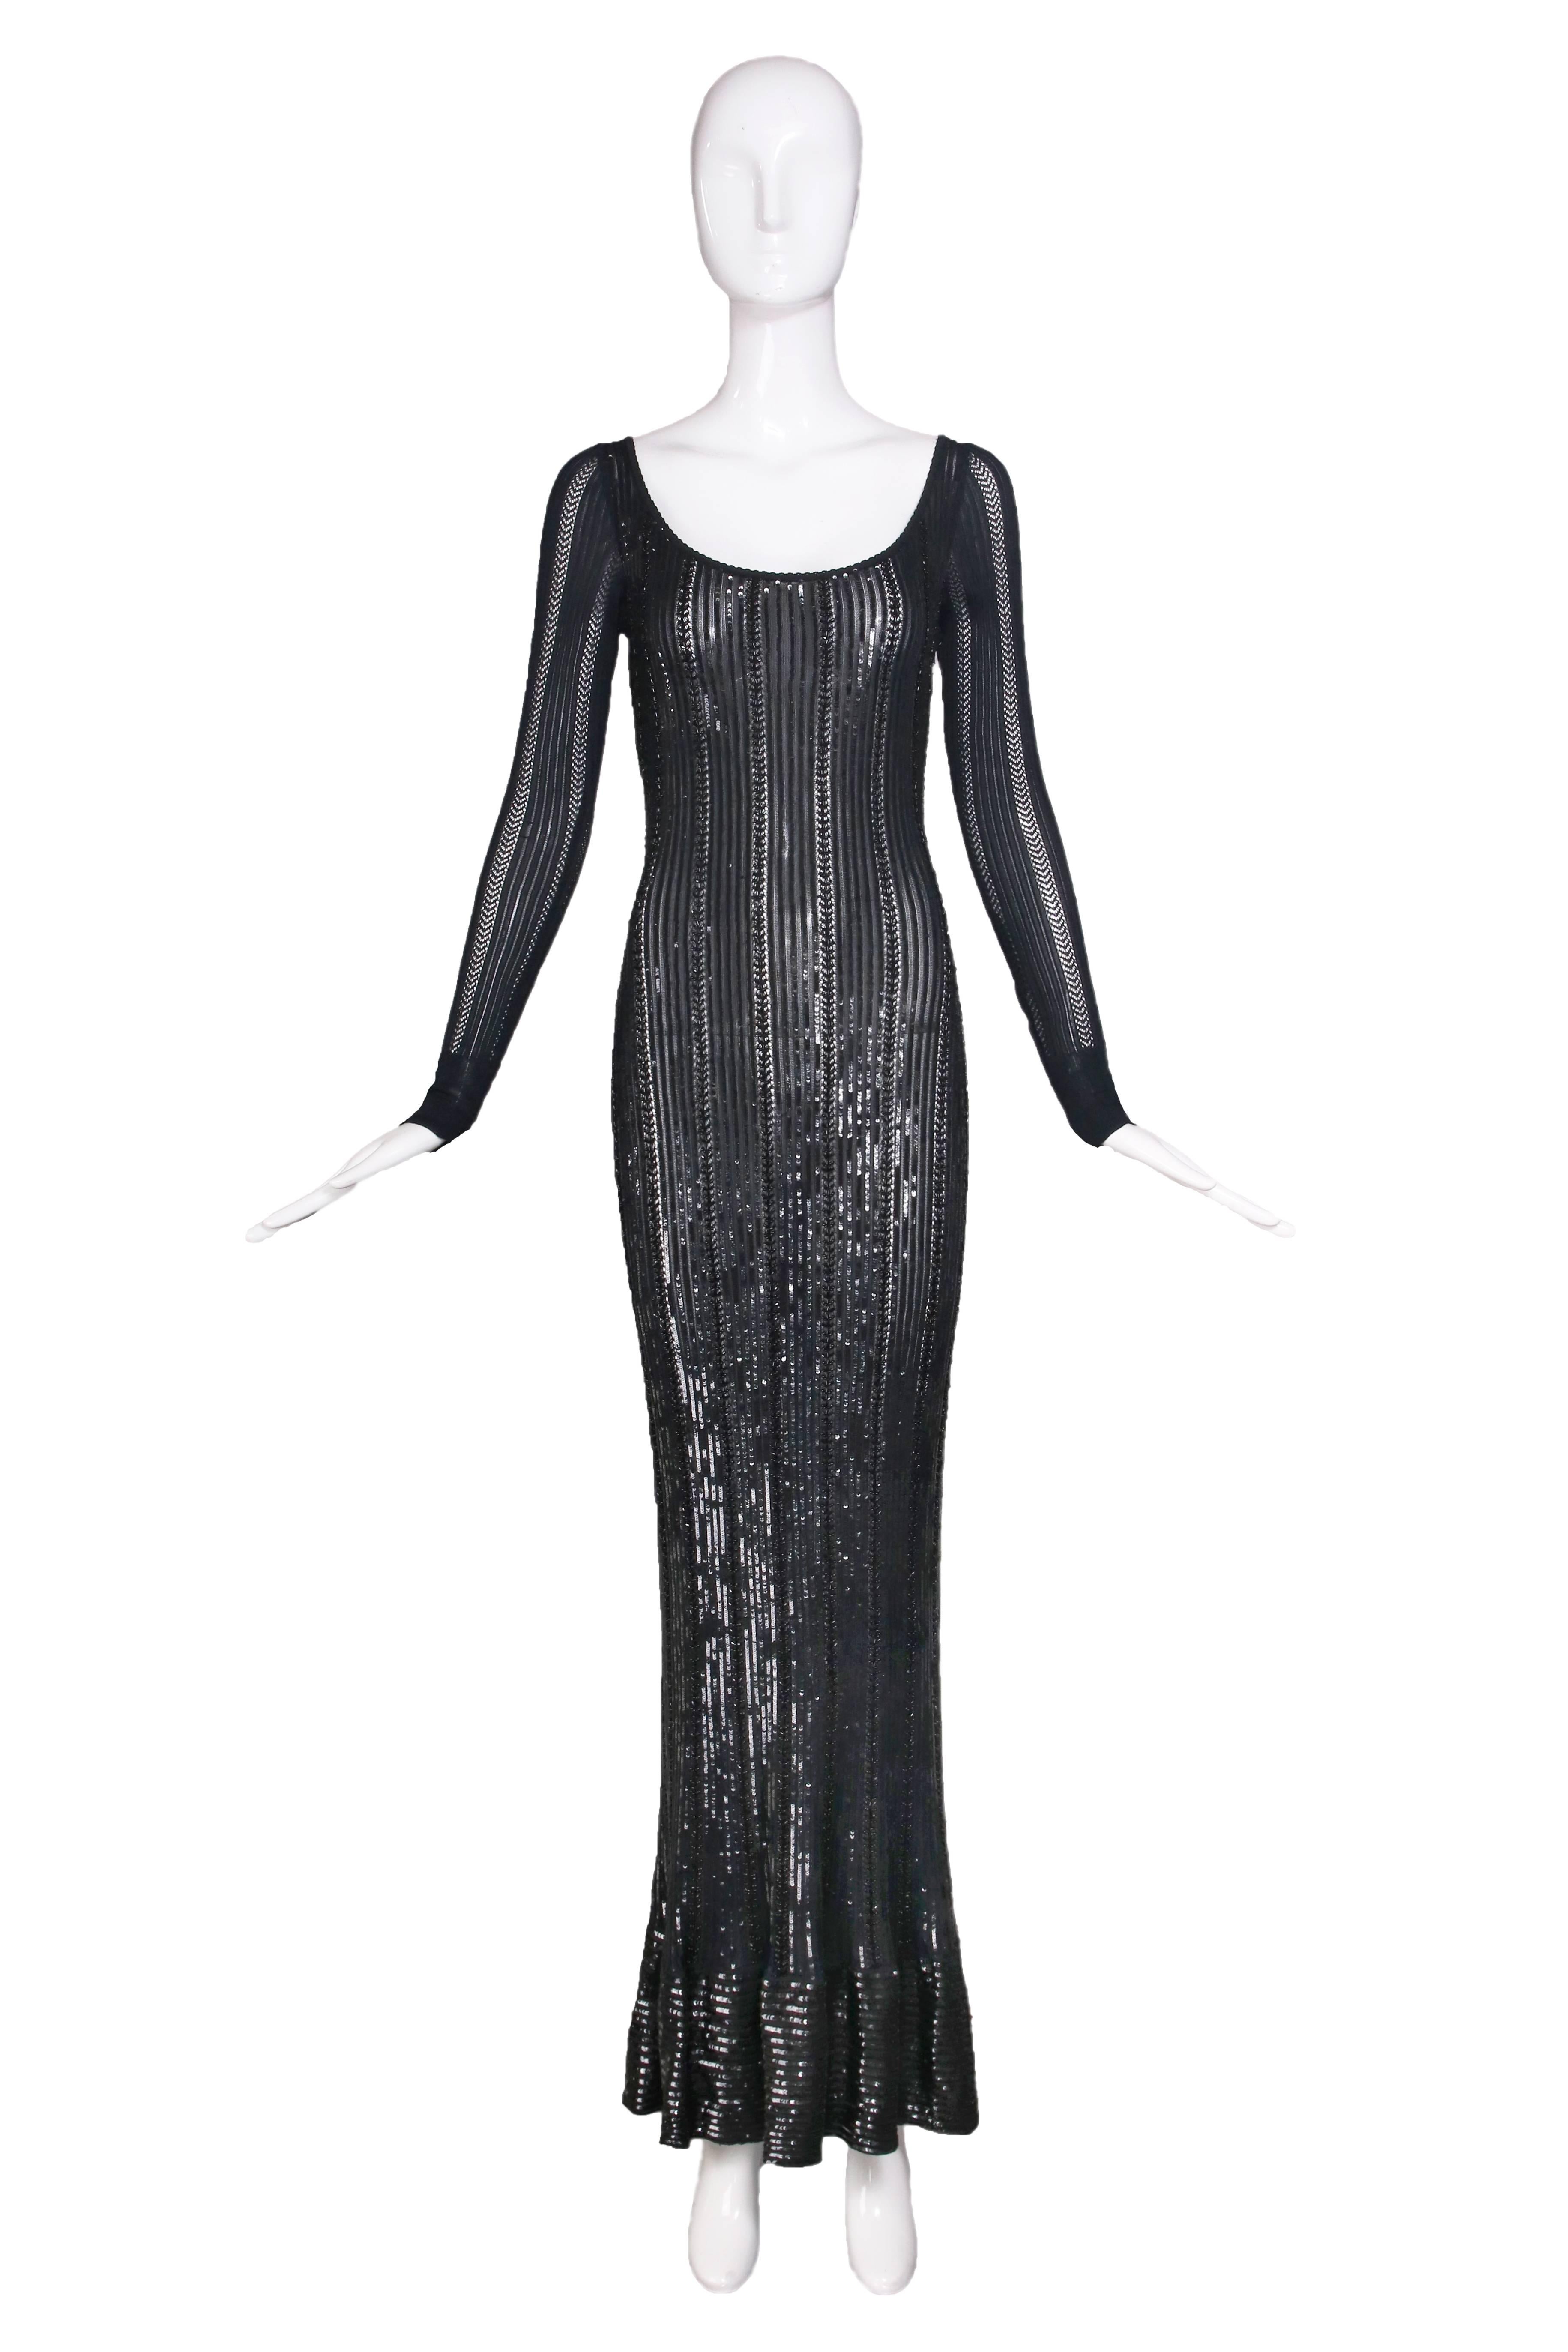 Circa 1996 Alaia black viscose, beaded & sequined long sleeved evening gown with slightly flared, beaded hem. In excellent condition. Size M.
MEASUREMENTS:
Bust - 32"
Waist - 26-27"
Hips - 36-37"
Length - 56"
Sleeves -